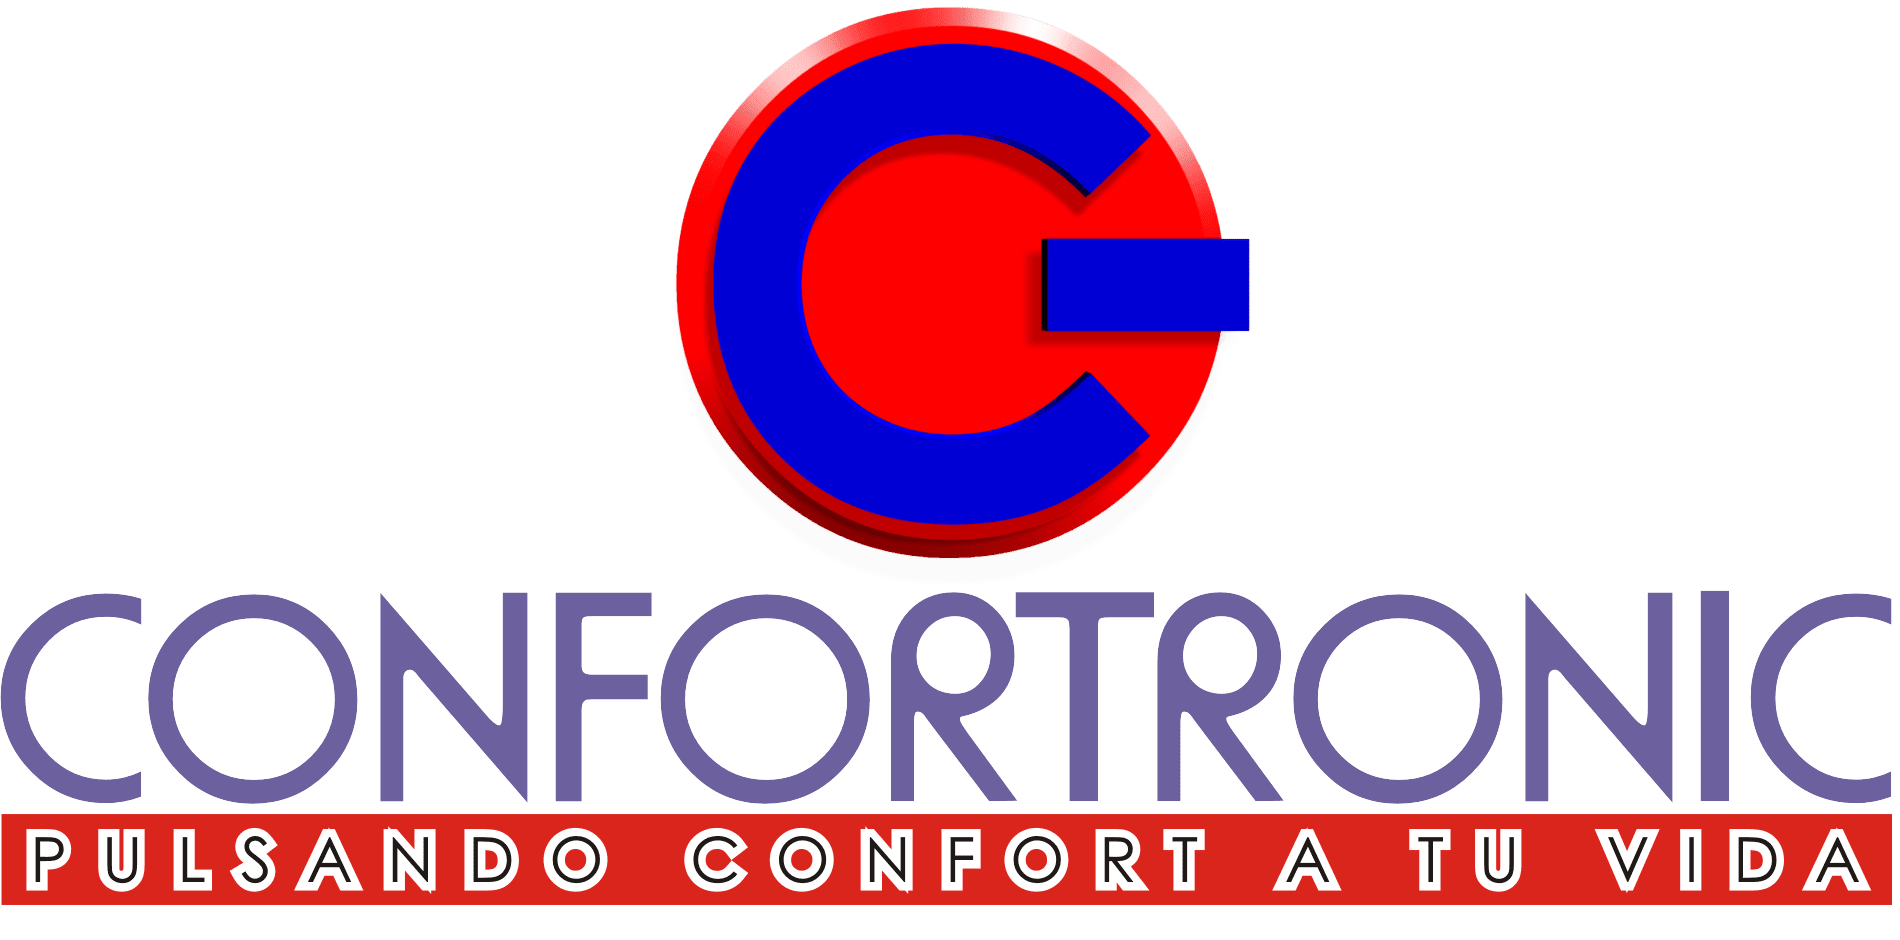 CONFORTRONIC